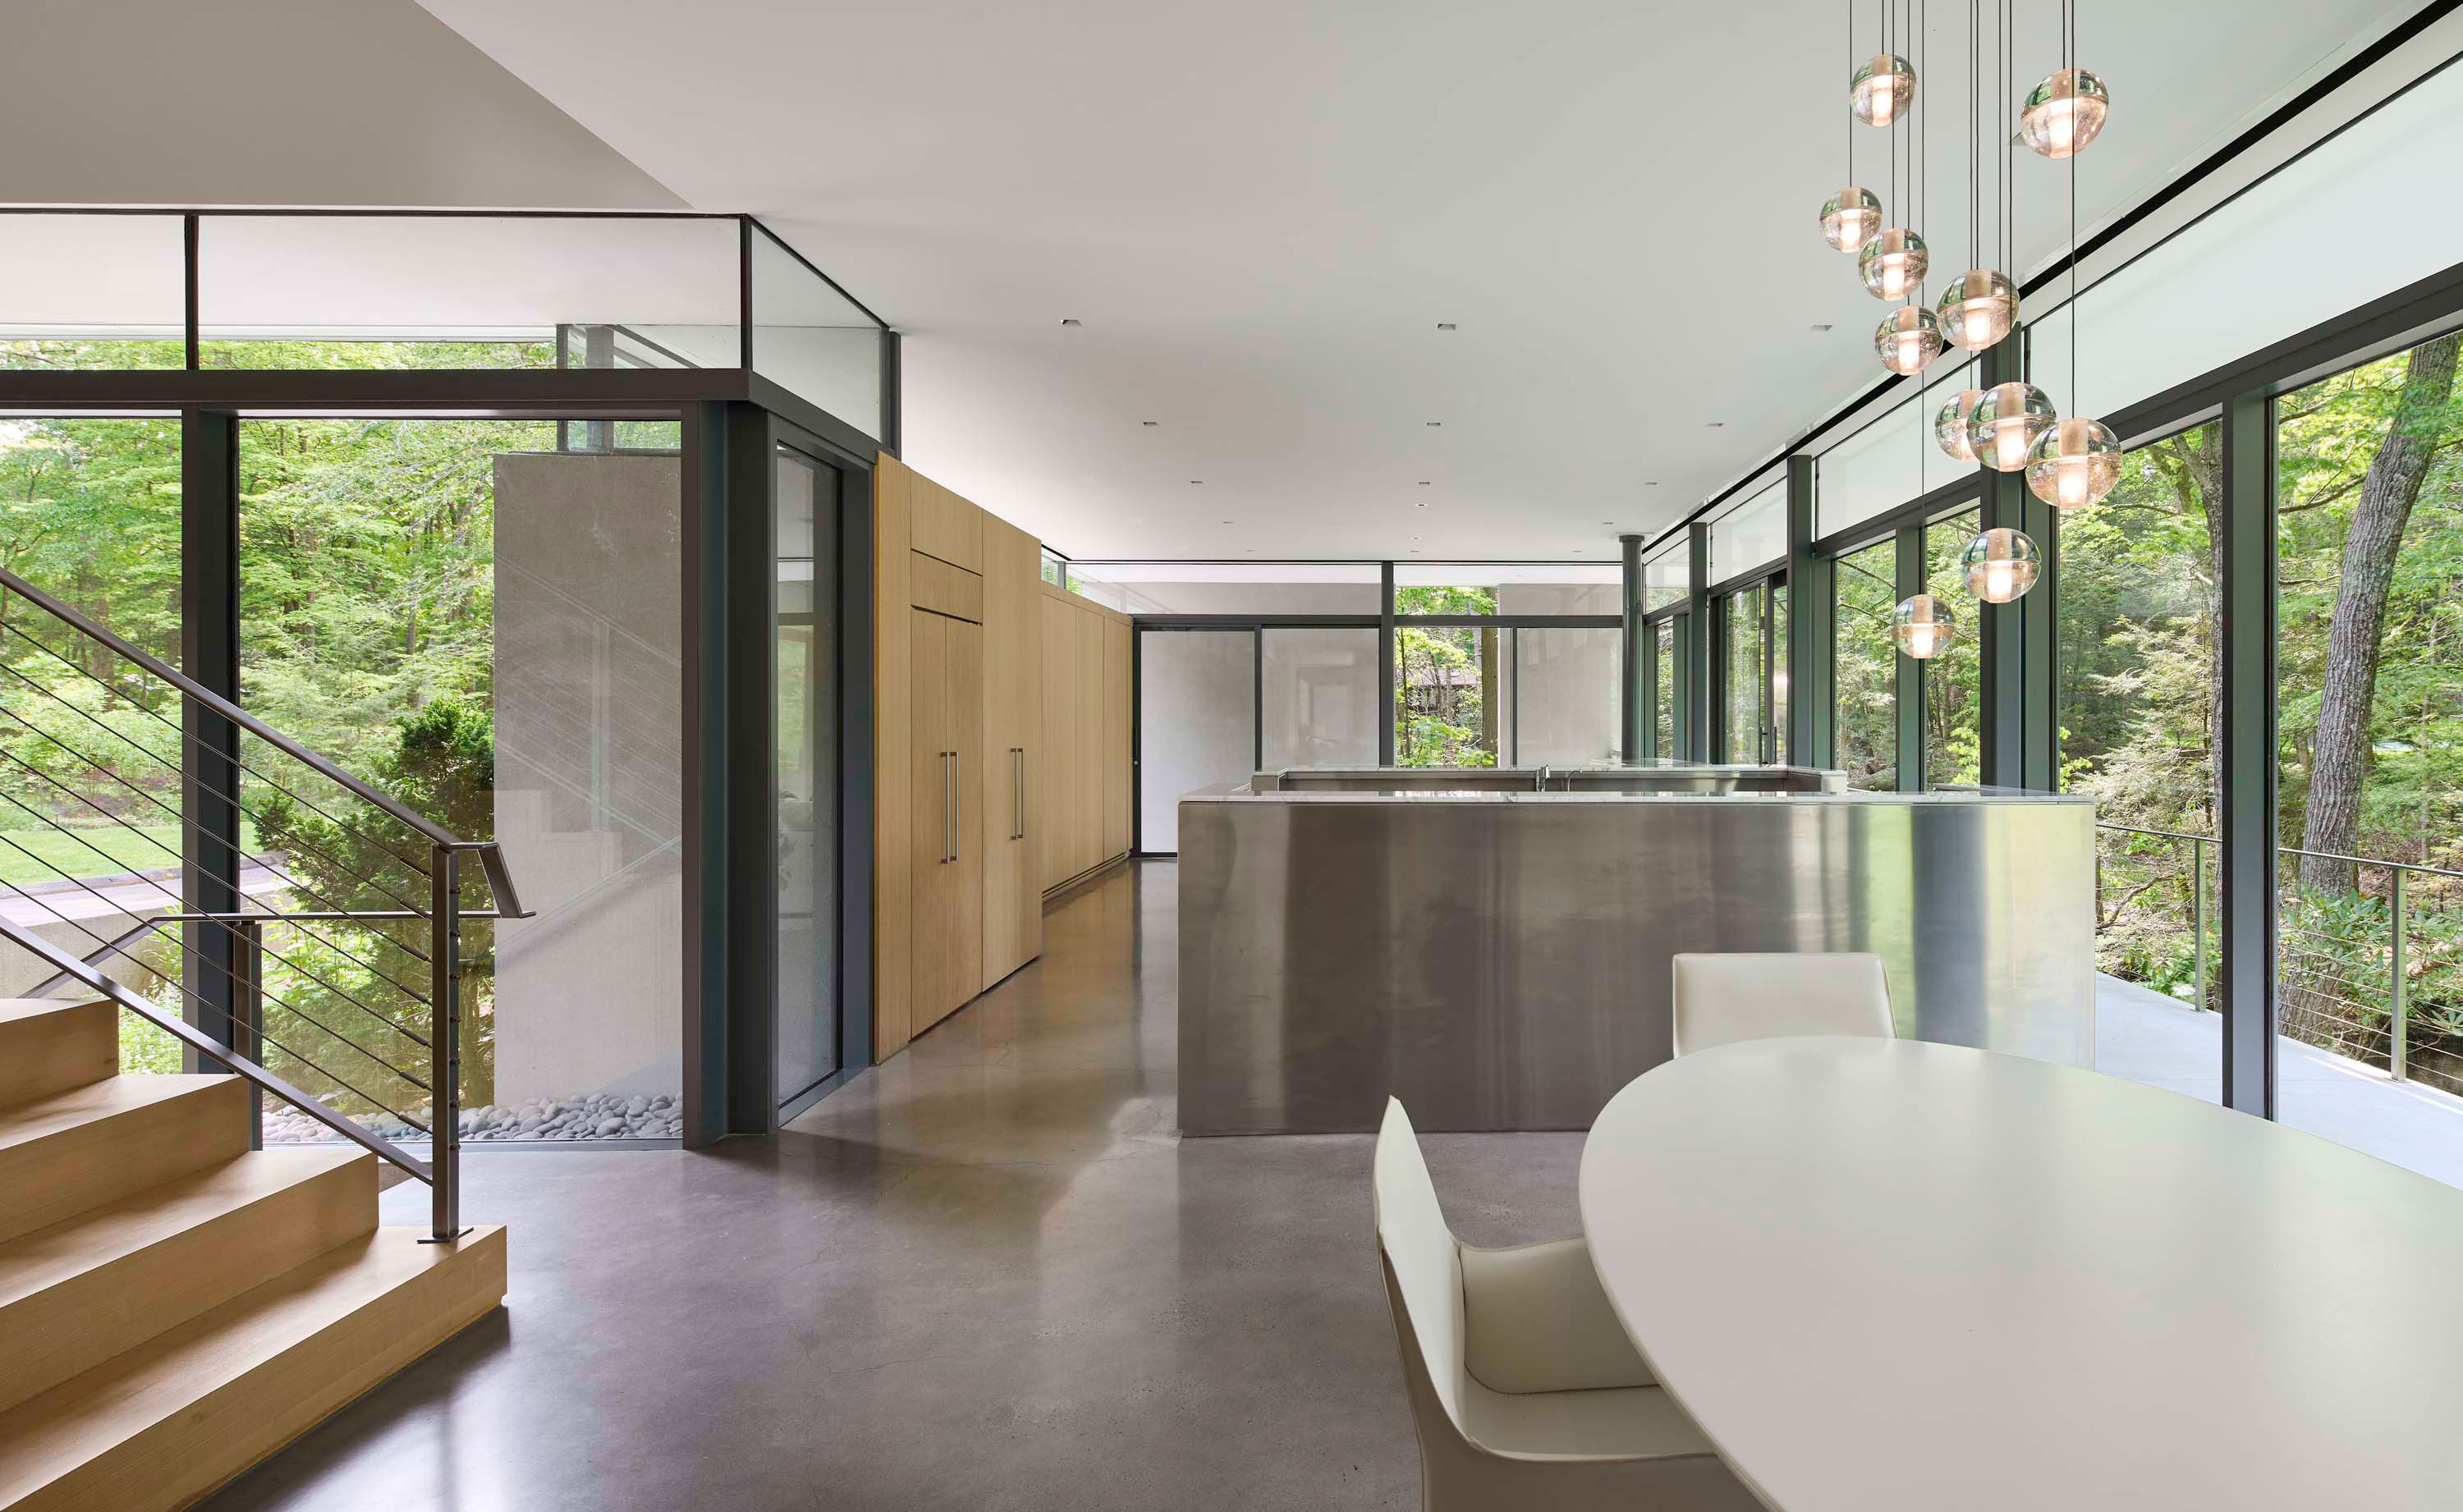 Interior photo of Weston Residence by Specht Novak Architects. Shot by Jasper Lazor, featuring a dining area, modern chandelier, and stairs to upper level.